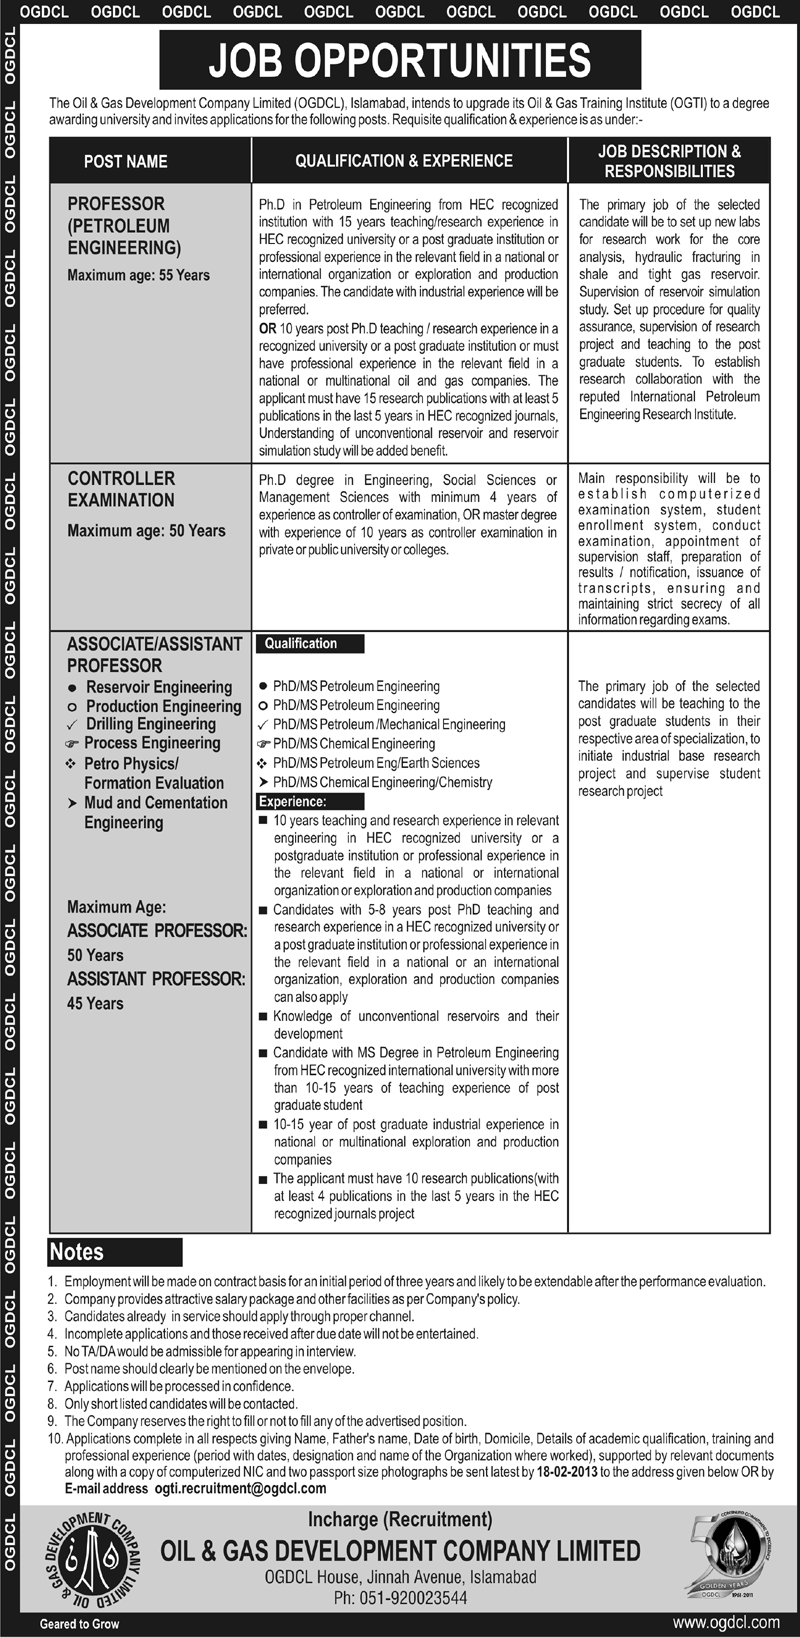 OGDCL Jobs 2013 for Faculty at Oil & Gas Training Institute (OGTI)